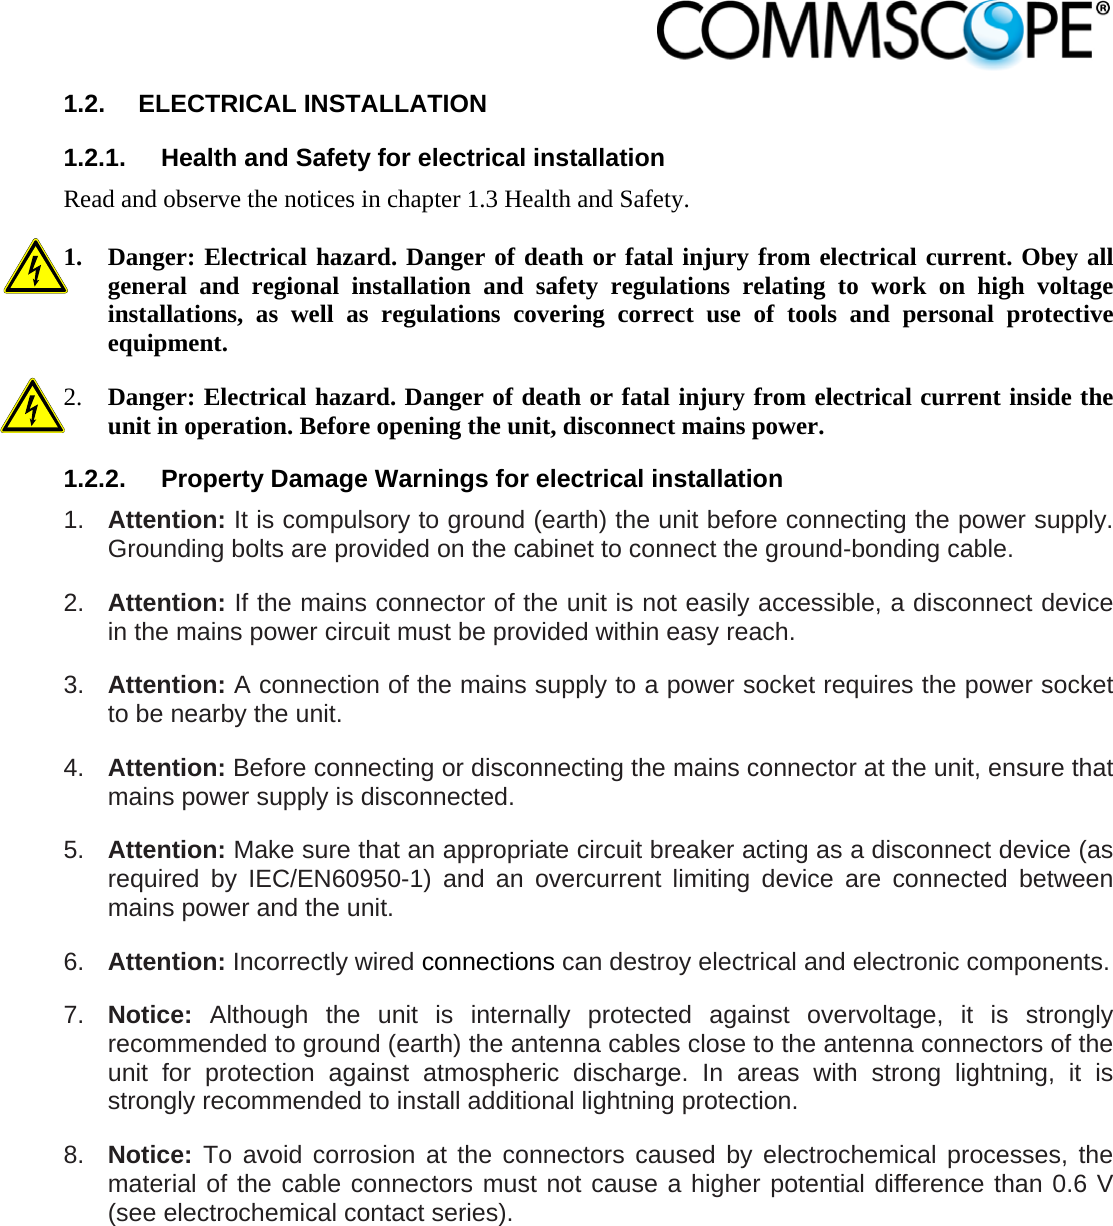                            1.2. ELECTRICAL INSTALLATION 1.2.1.  Health and Safety for electrical installation Read and observe the notices in chapter 1.3 Health and Safety.  1. Danger: Electrical hazard. Danger of death or fatal injury from electrical current. Obey all general and regional installation and safety regulations relating to work on high voltage installations, as well as regulations covering correct use of tools and personal protective equipment. 2. Danger: Electrical hazard. Danger of death or fatal injury from electrical current inside the unit in operation. Before opening the unit, disconnect mains power. 1.2.2.  Property Damage Warnings for electrical installation 1.  Attention: It is compulsory to ground (earth) the unit before connecting the power supply. Grounding bolts are provided on the cabinet to connect the ground-bonding cable. 2.  Attention: If the mains connector of the unit is not easily accessible, a disconnect device in the mains power circuit must be provided within easy reach. 3.  Attention: A connection of the mains supply to a power socket requires the power socket to be nearby the unit. 4.  Attention: Before connecting or disconnecting the mains connector at the unit, ensure that mains power supply is disconnected. 5.  Attention: Make sure that an appropriate circuit breaker acting as a disconnect device (as required by IEC/EN60950-1) and an overcurrent limiting device are connected between mains power and the unit. 6.  Attention: Incorrectly wired connections can destroy electrical and electronic components.  7.  Notice: Although the unit is internally protected against overvoltage, it is strongly recommended to ground (earth) the antenna cables close to the antenna connectors of the unit for protection against atmospheric discharge. In areas with strong lightning, it is strongly recommended to install additional lightning protection. 8.  Notice: To avoid corrosion at the connectors caused by electrochemical processes, the material of the cable connectors must not cause a higher potential difference than 0.6 V (see electrochemical contact series). 